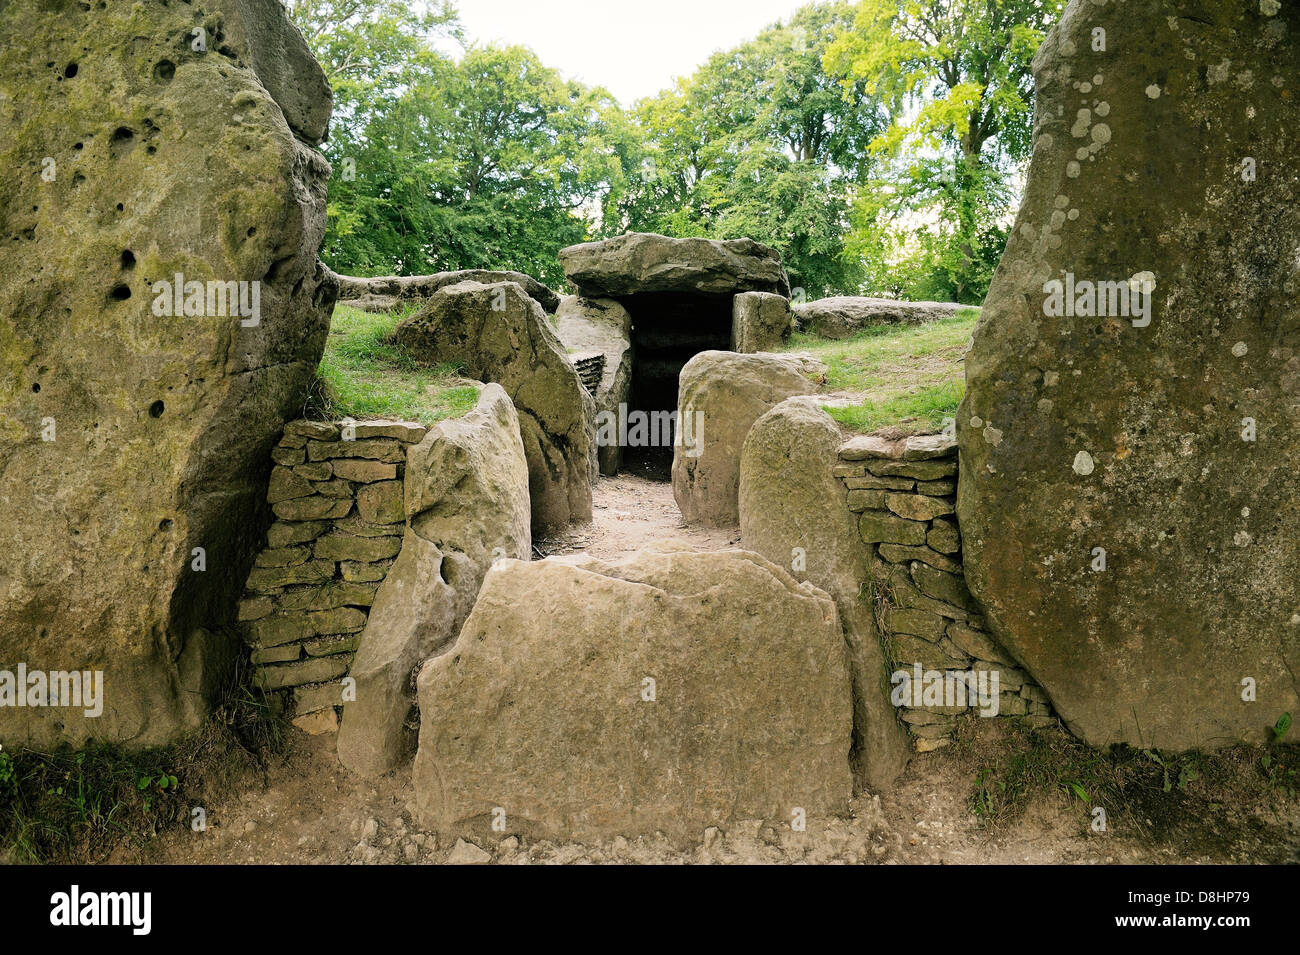 Wayland’s Smithy Neolithic long barrow chamber tomb. Oxfordshire England. Entrance passage and chambers beyond façade stones Stock Photo